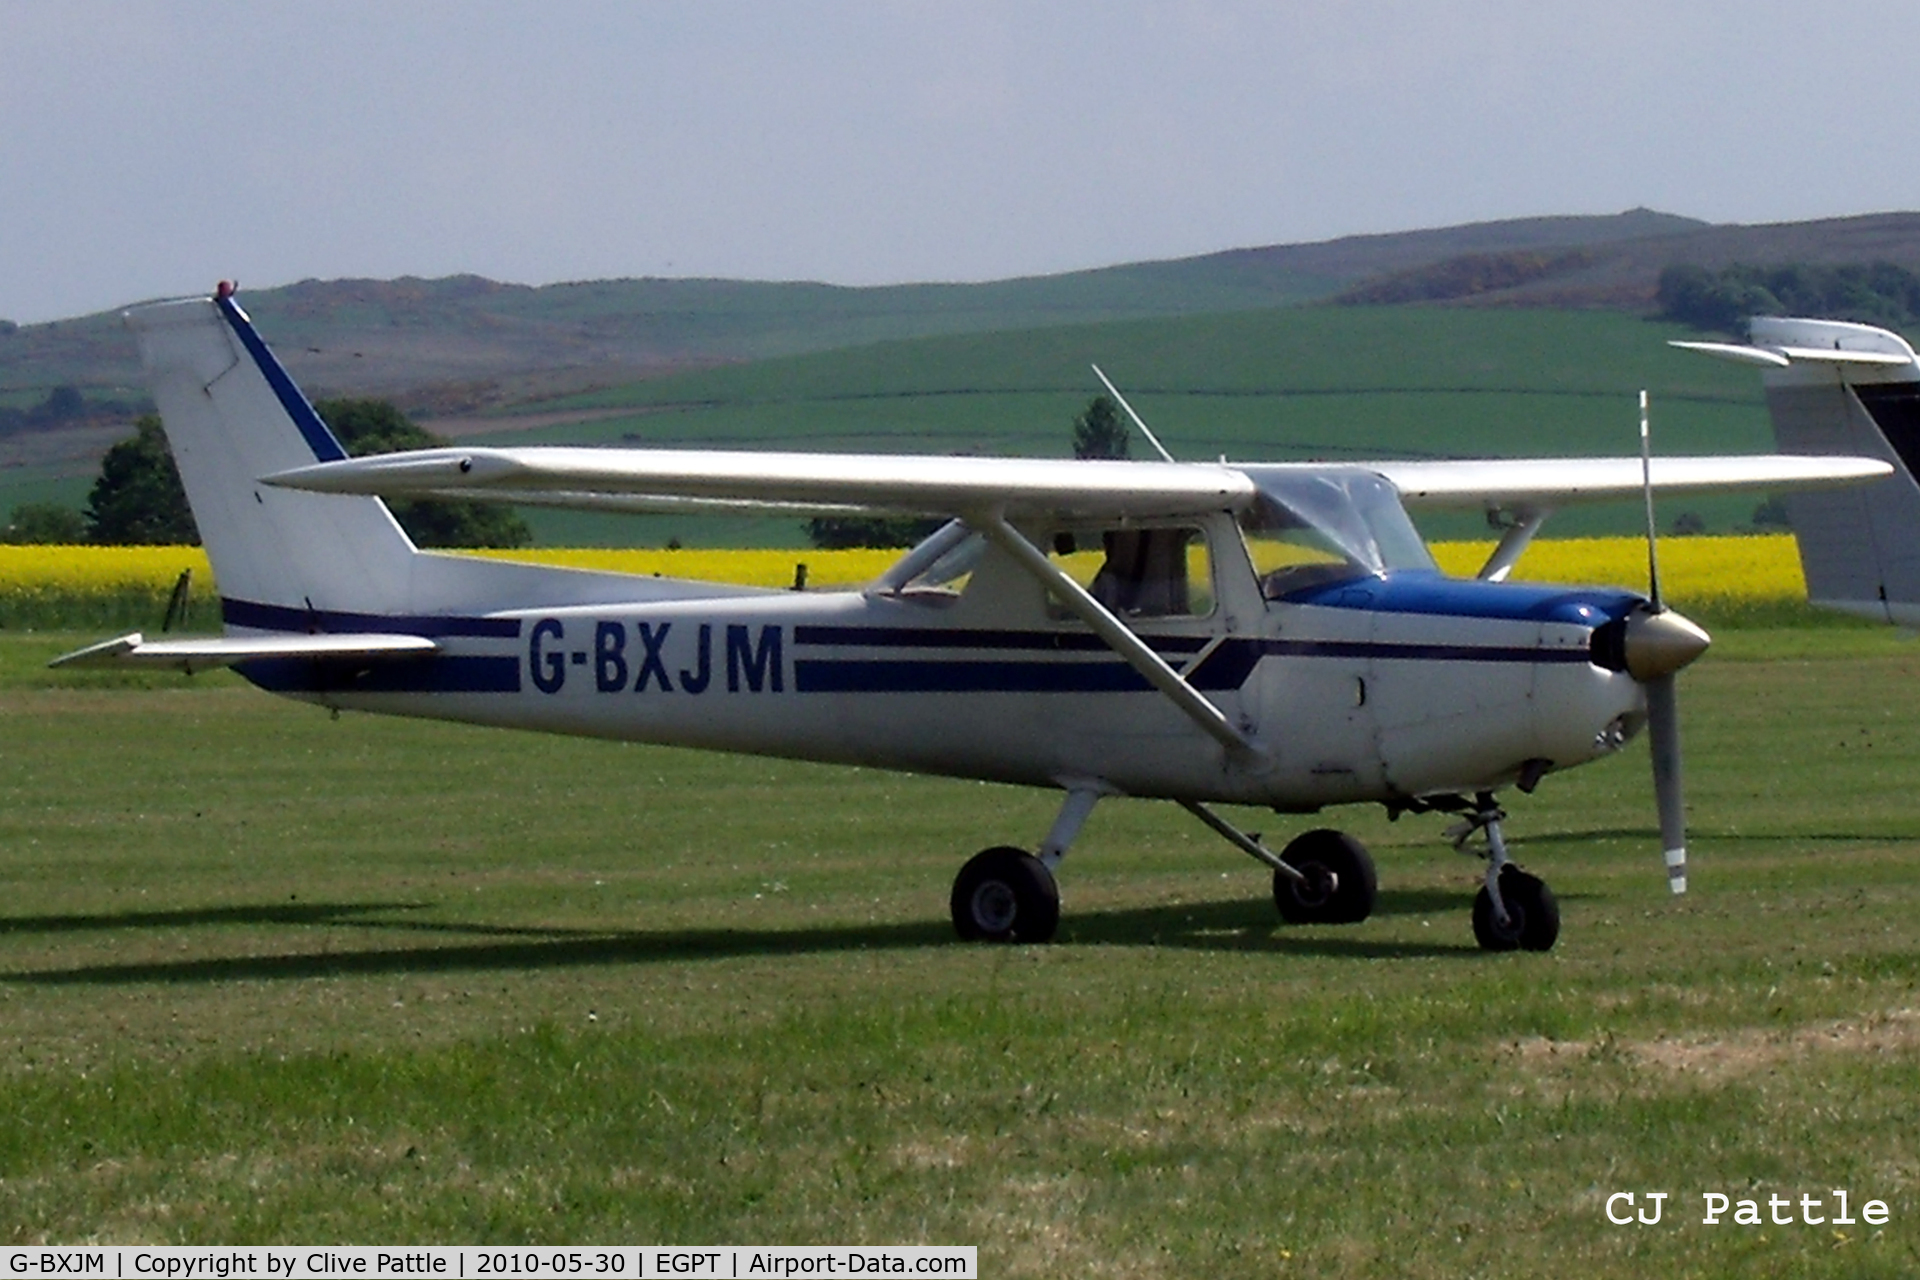 G-BXJM, 1978 Cessna 152 C/N 152-82380, On display in the static park during the Heart of Scotland Airshow held at Perth (Scone) airfield EGPT